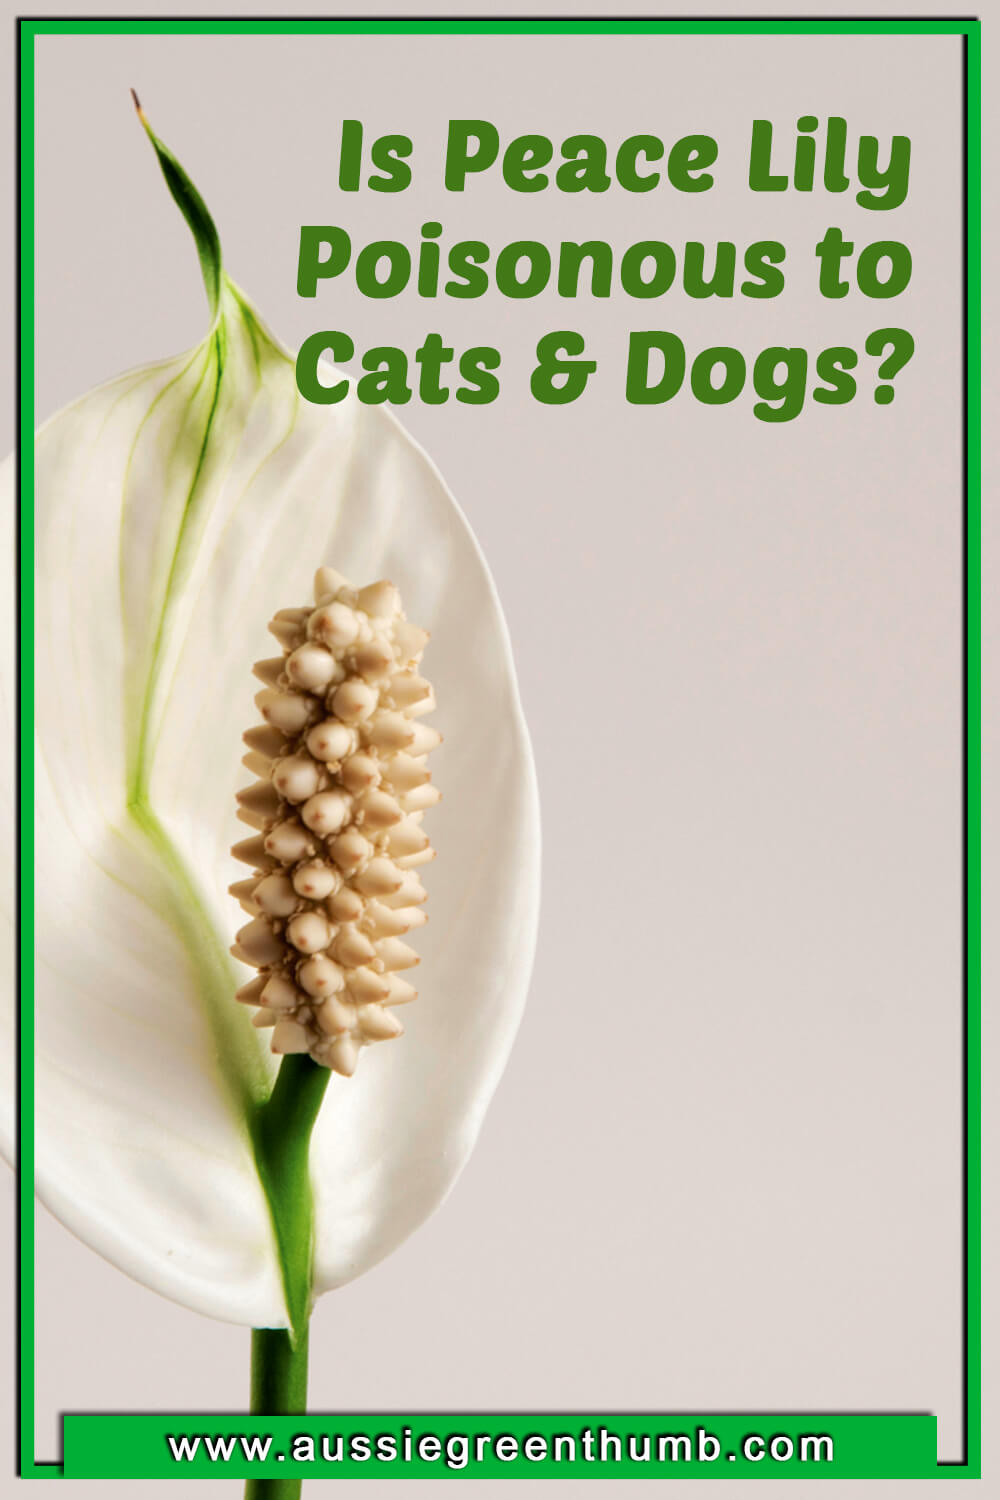 Is Peace Lily Poisonous to Cats and Dogs?